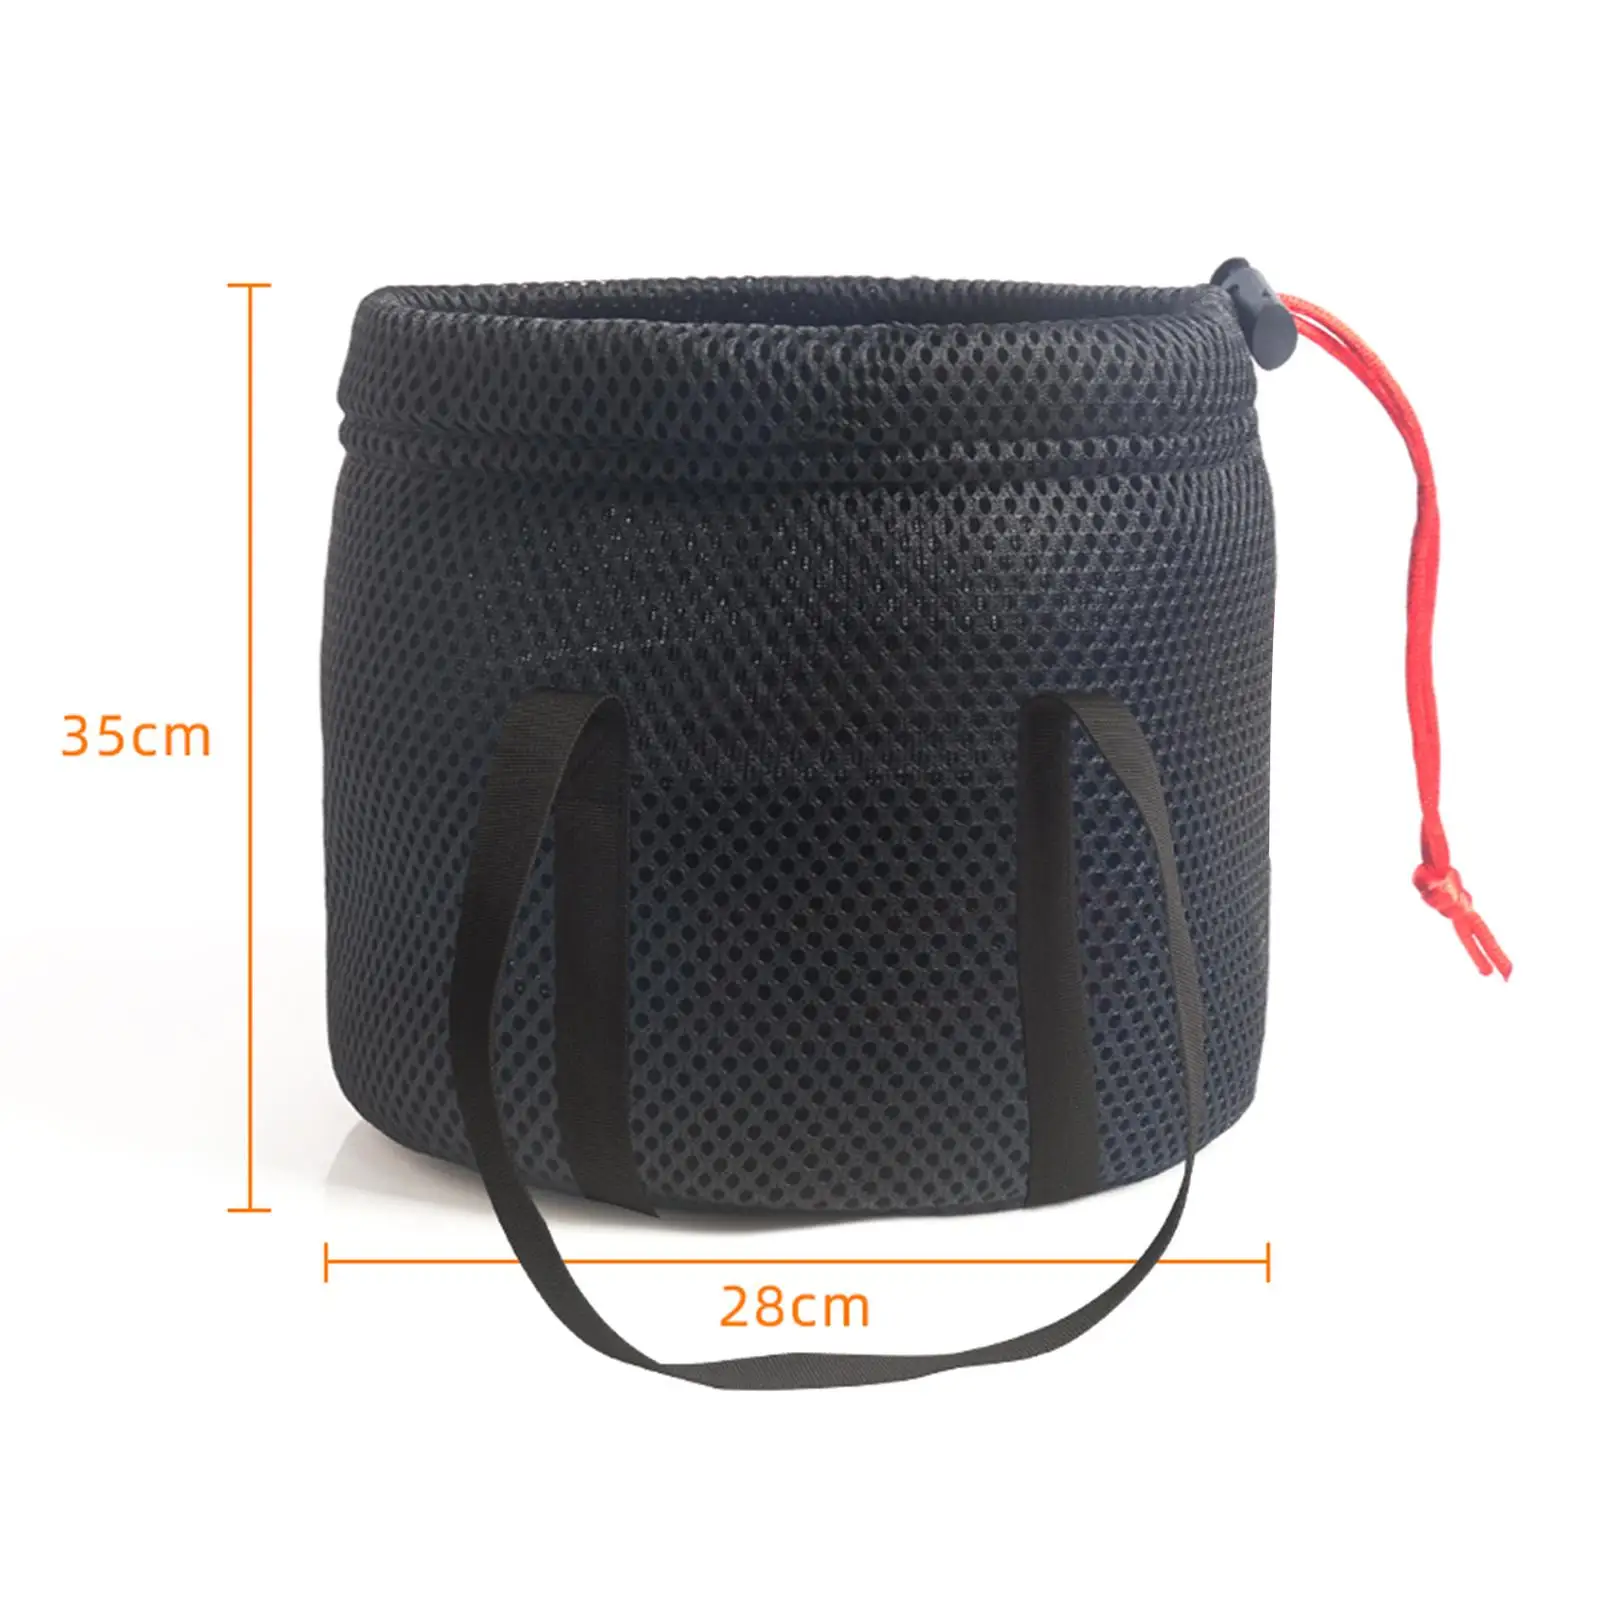 Camping Pot Storage Bag Drawstring Durable Black Protective Thickening Utensil Carrying Bag for Camp Supplies Beach Fishing BBQ